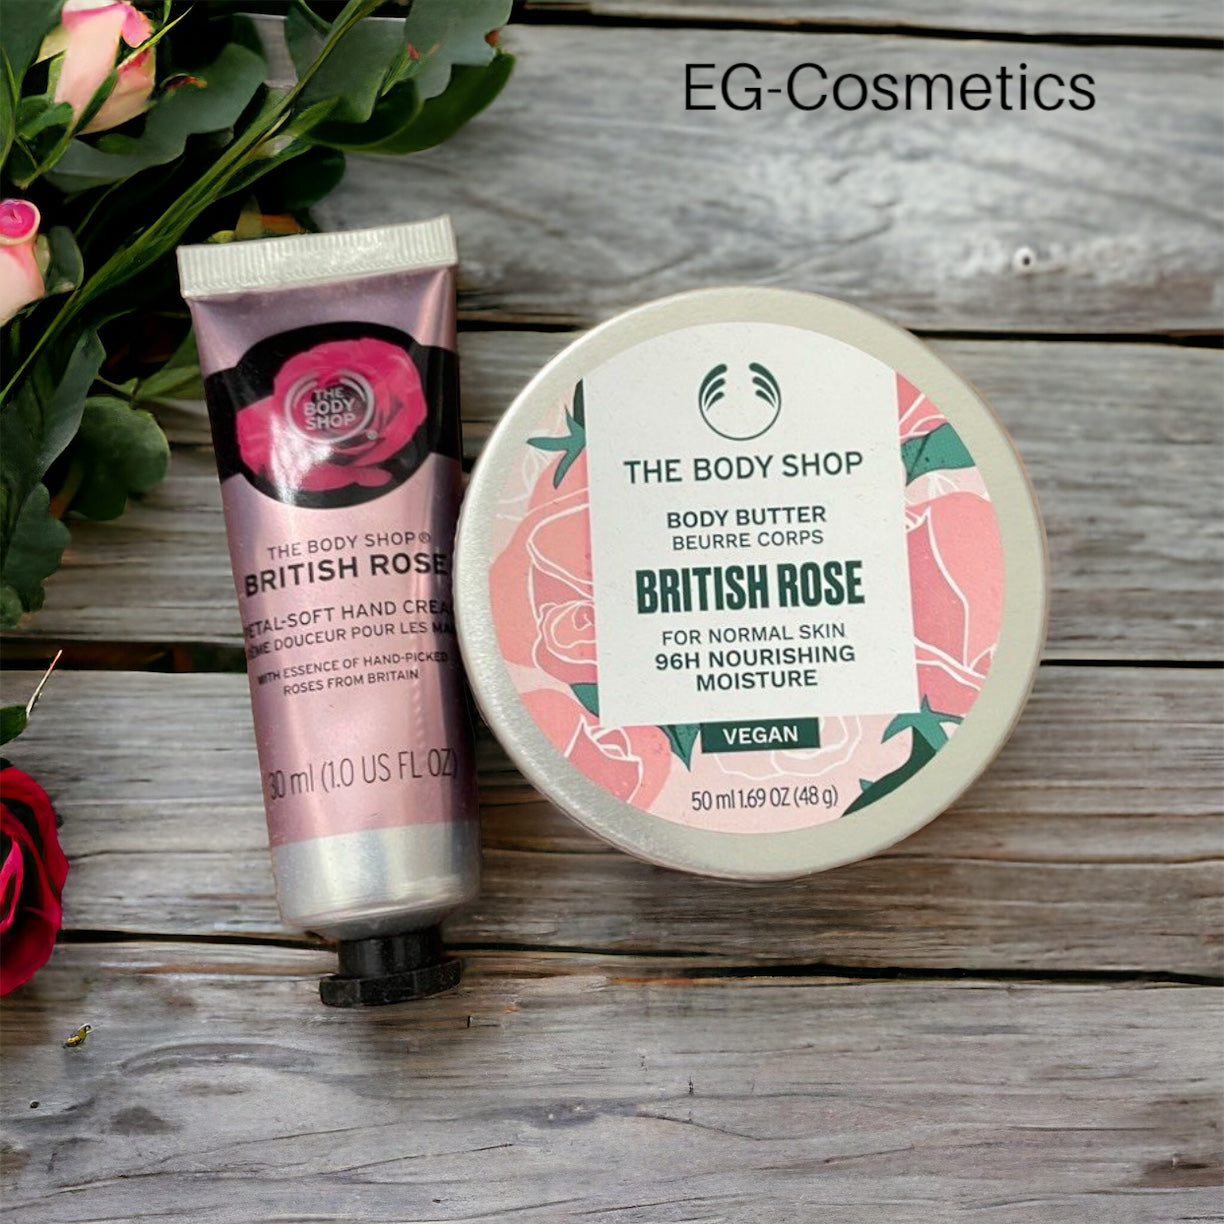 The Body Shop BY EG-Cosmetics British Rose Hand Cream & Body Butter DUO